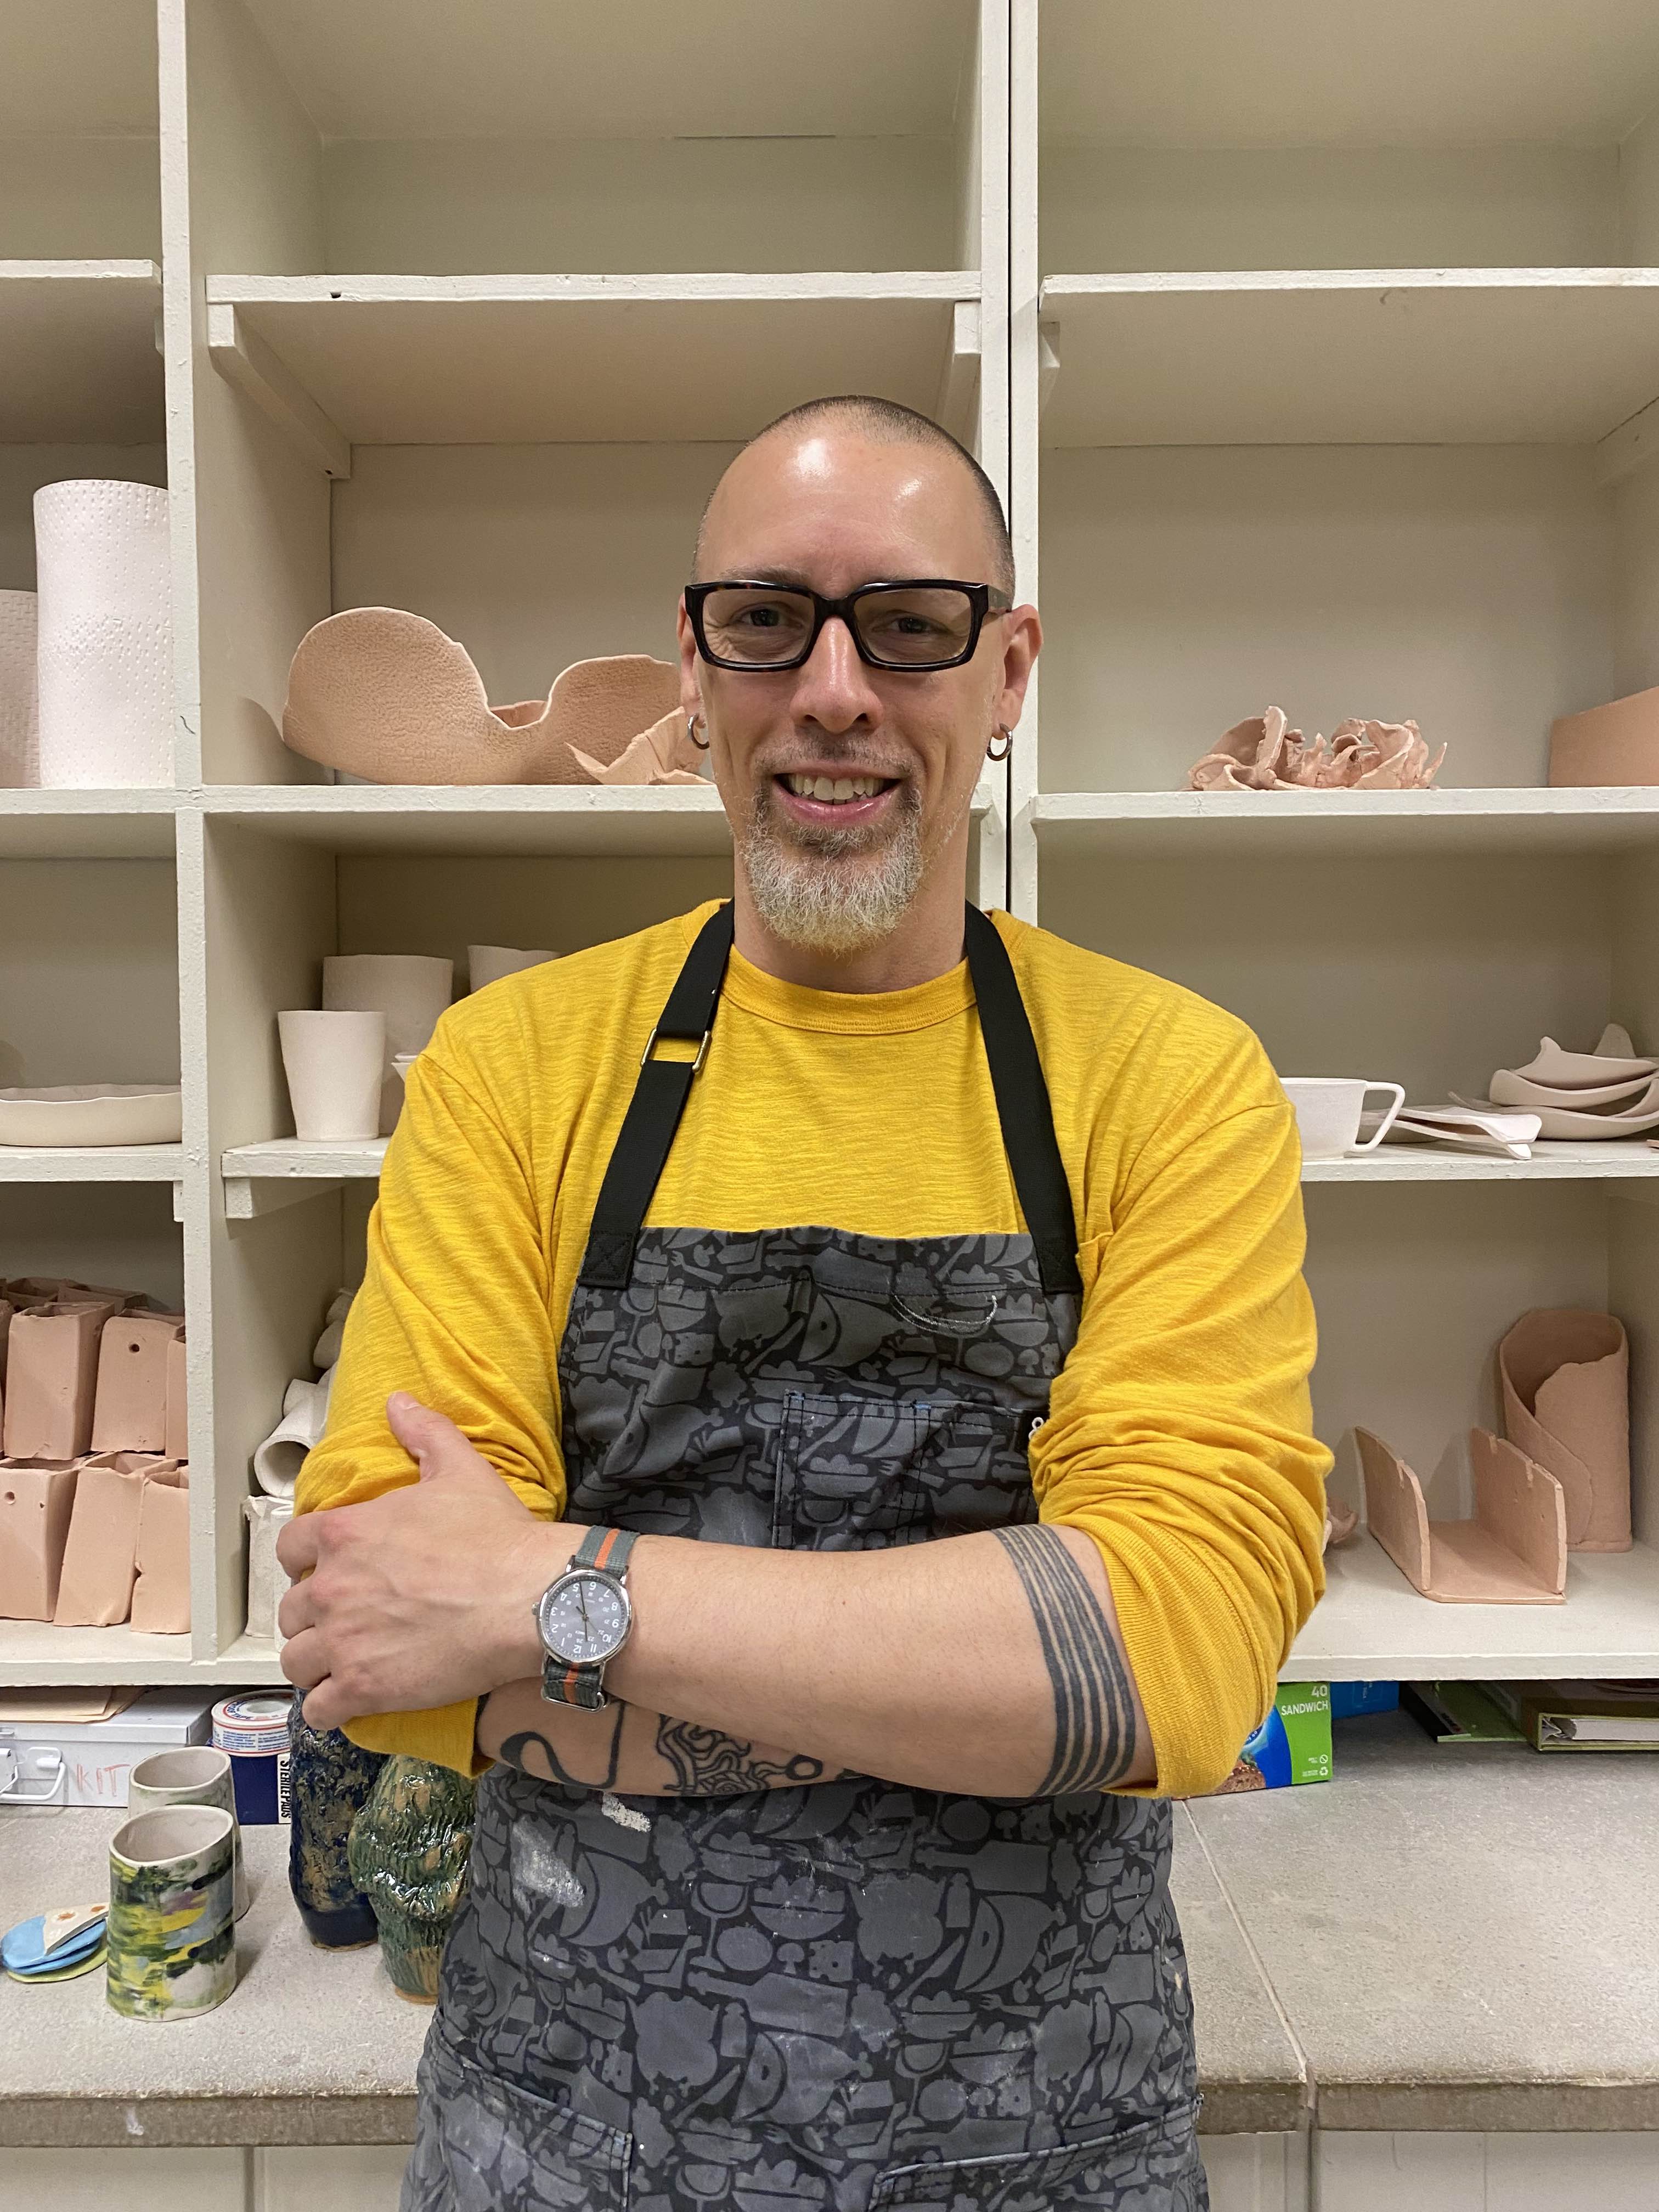 This is a picture of Jason Watson who is a doctoral student and ceramics fellow within the Art and Art Education program at teachers College.